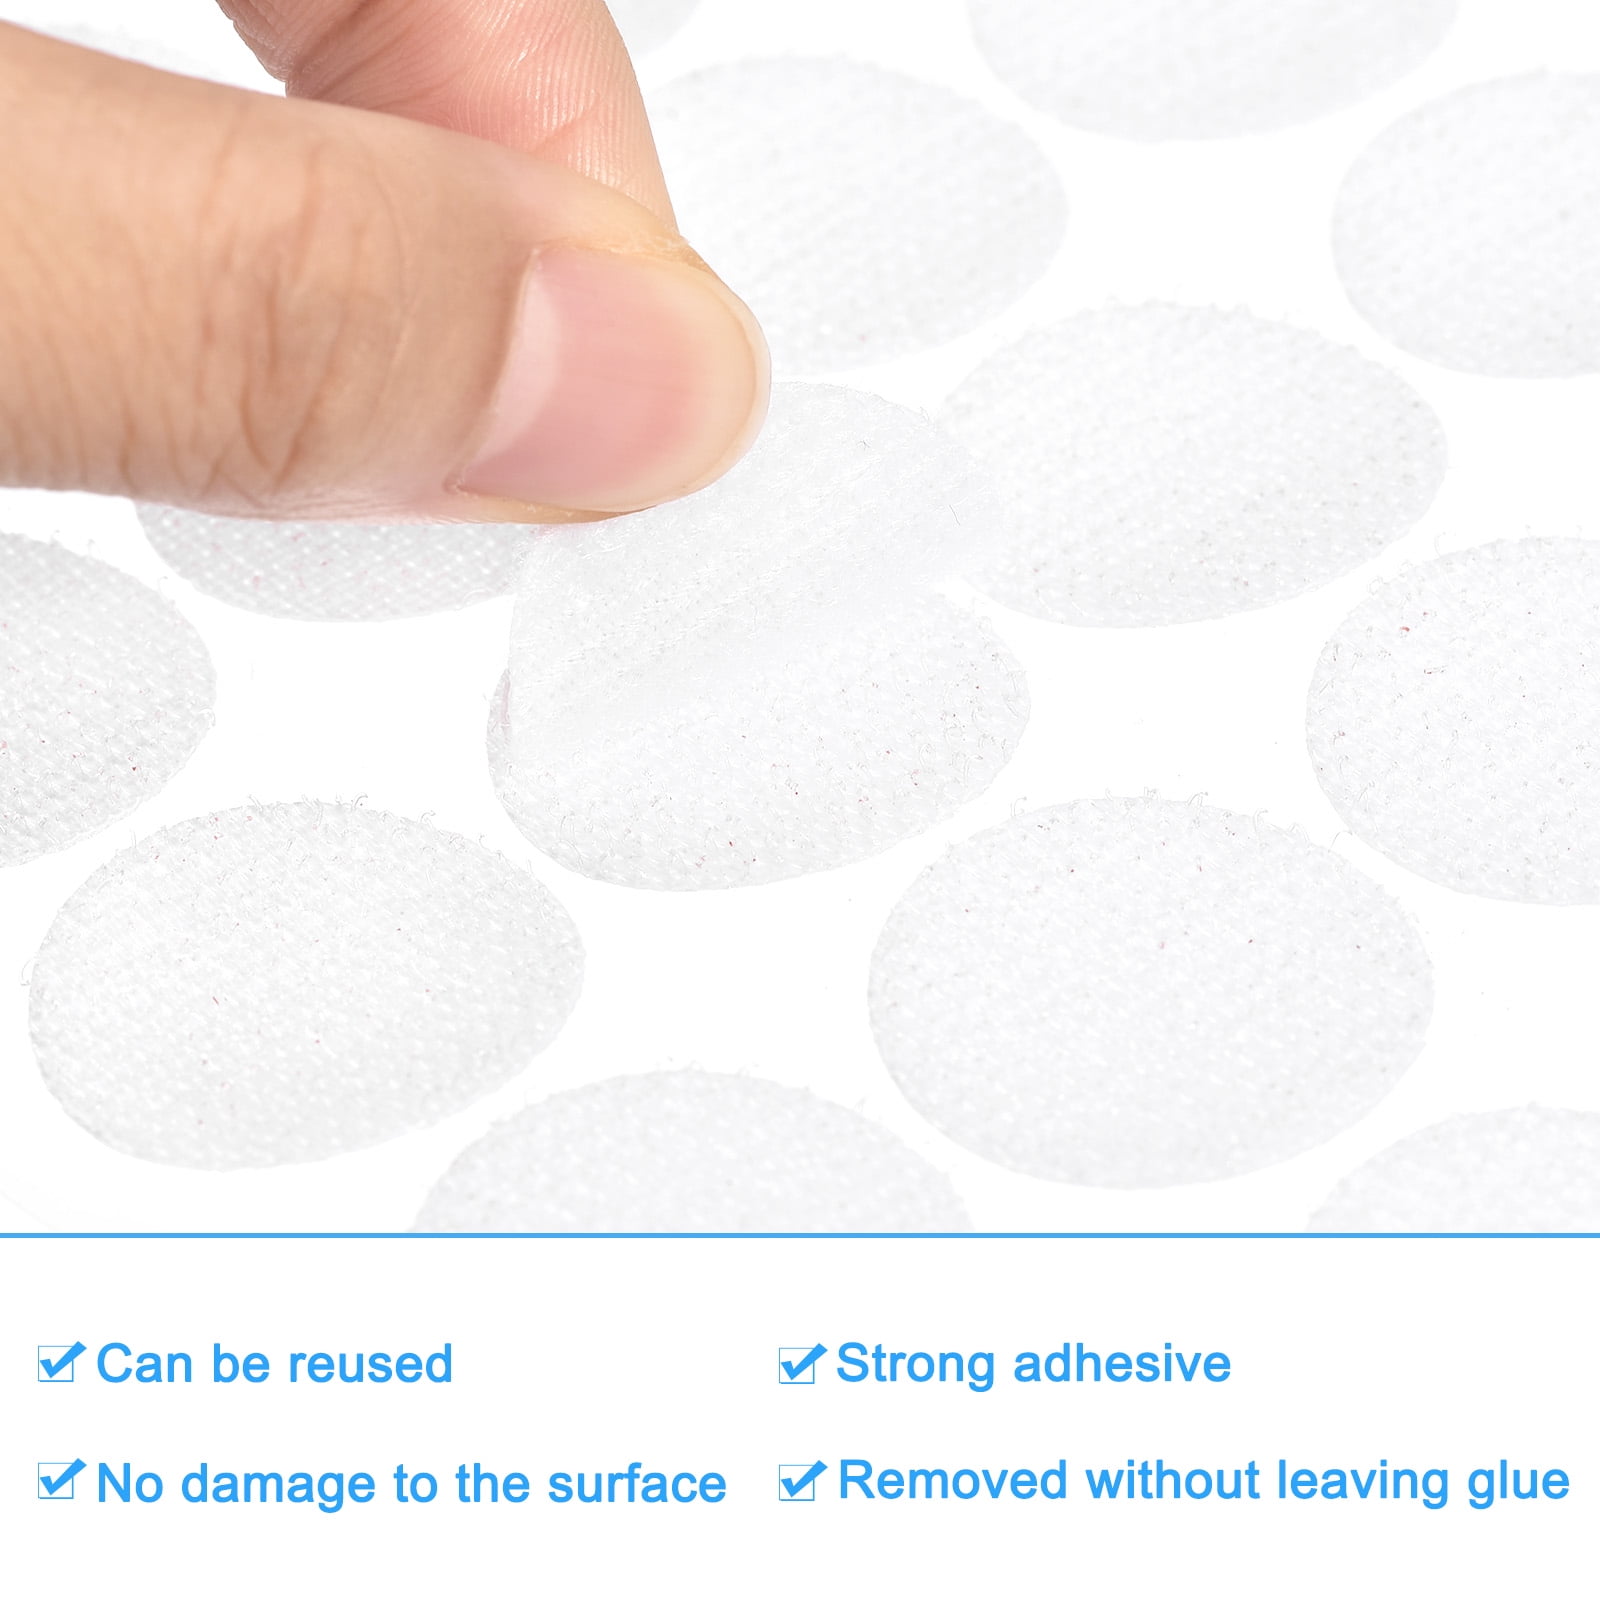 1000 Pcs 20mm Self-Adhesive Velcro Dots Glue Dots for Paper